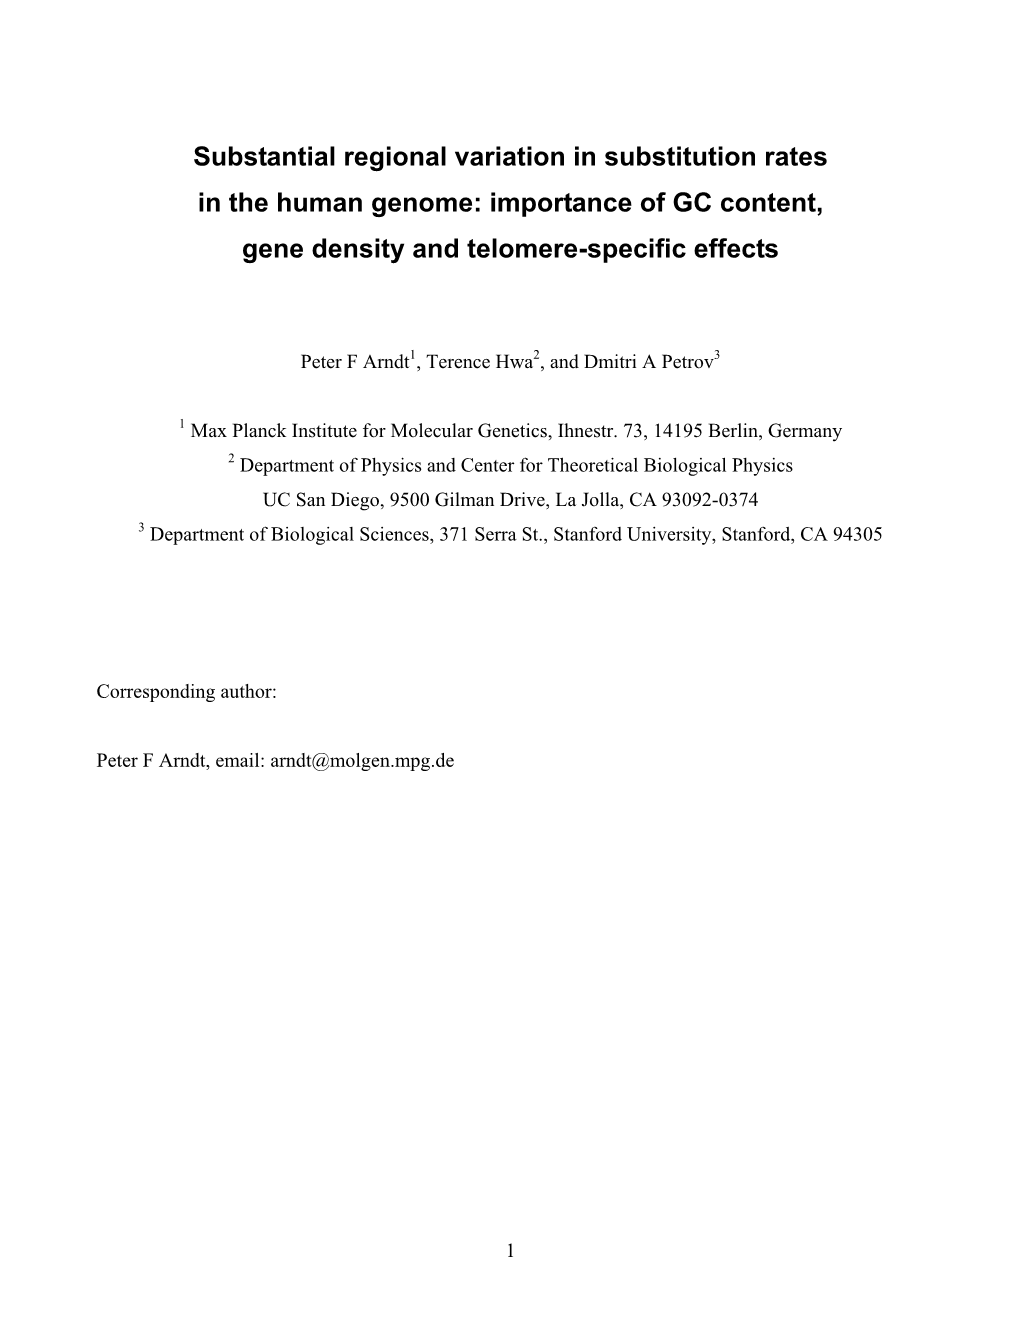 Importance of GC Content, Gene Density and Telomere-Specific Effects